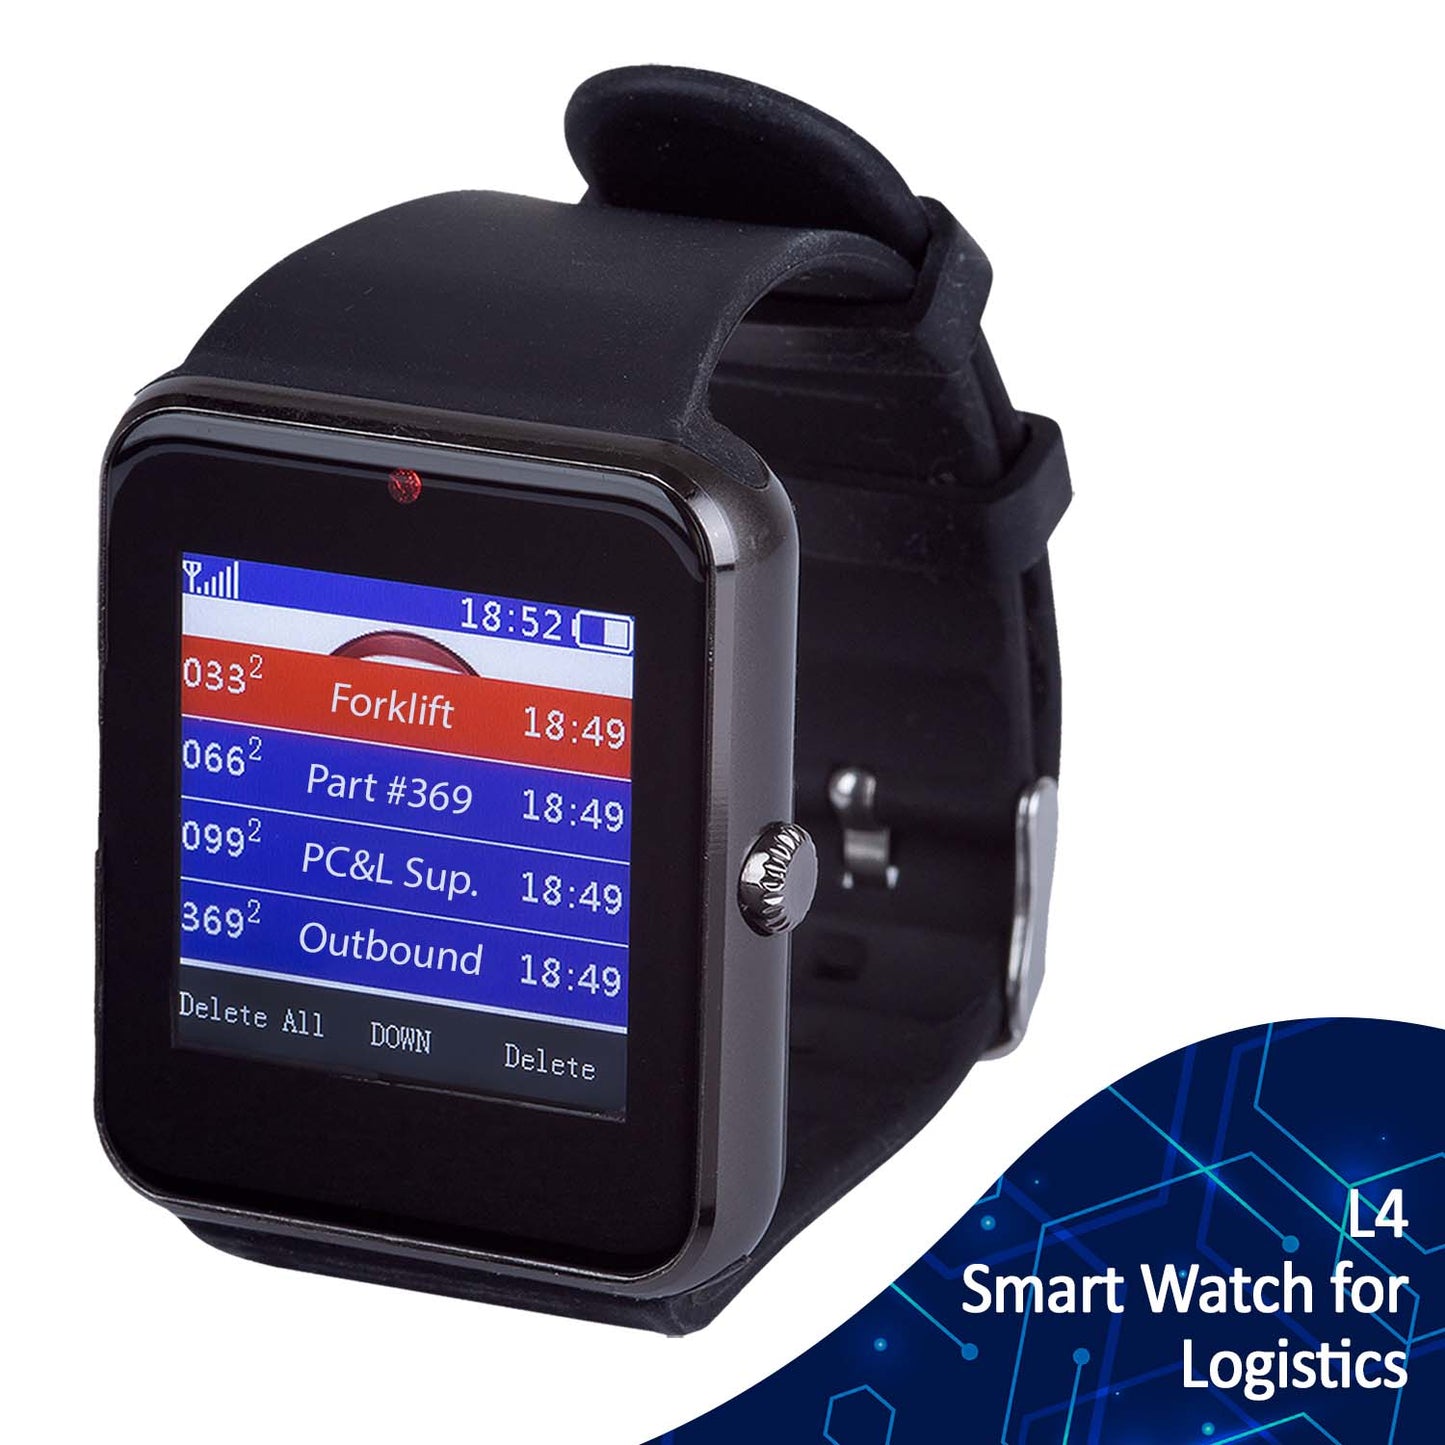 Wireless Receiver Pager in format of a smart watch showing customizable calls for logistics and warehousing